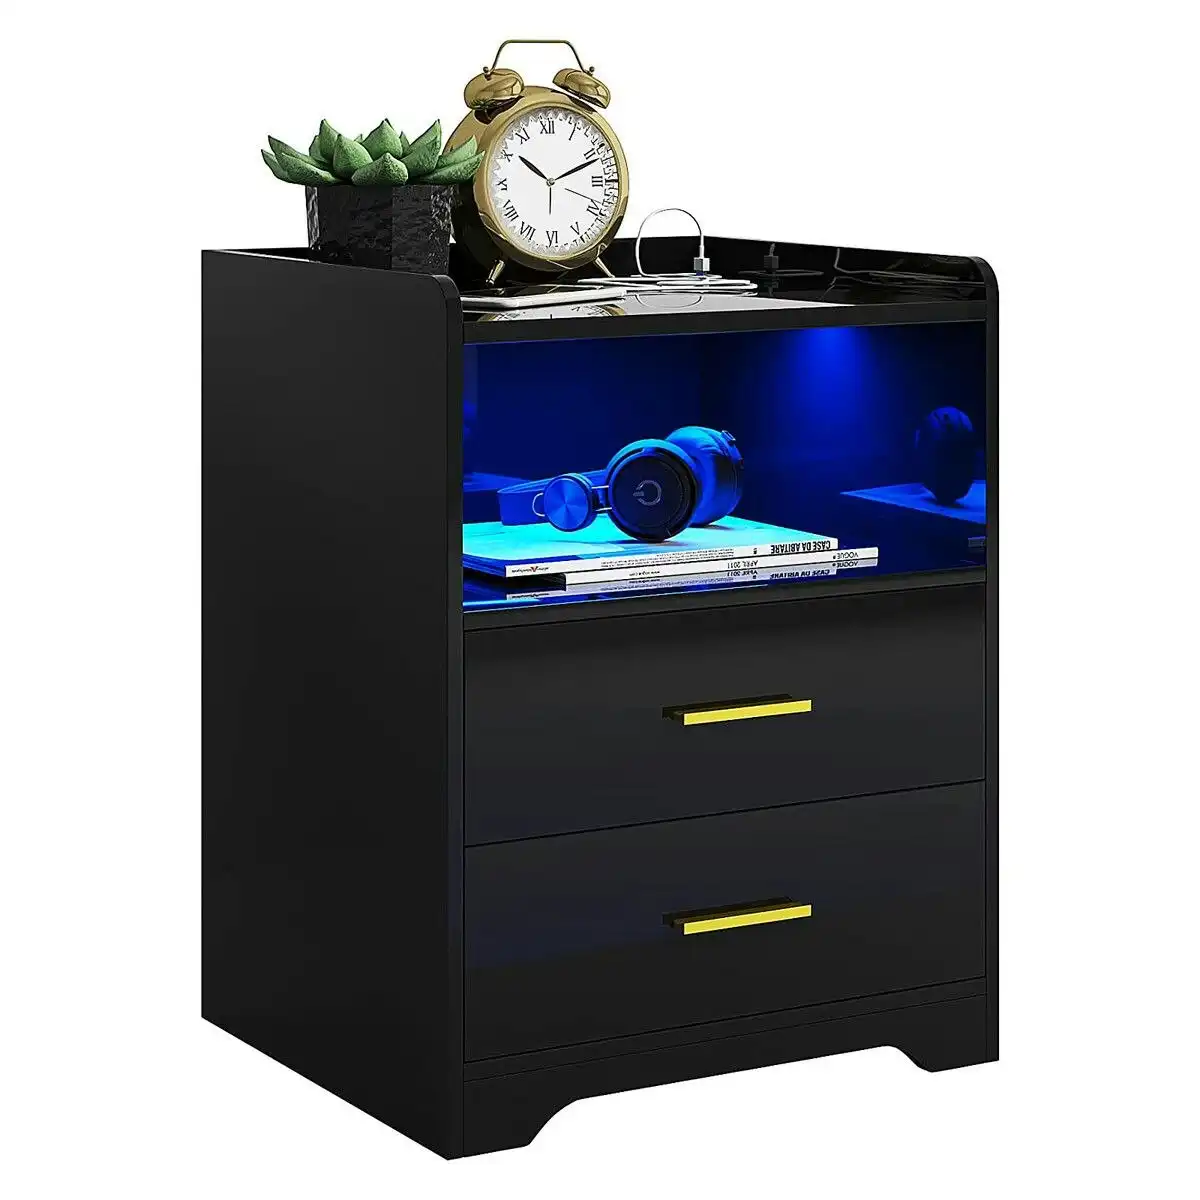 Ausway Luxsuite Smart Bedside Table Black LED Side End Nightstand Sofa Storage Cabinet Bedroom Full High Gloss 2 Drawers 1 Open Shelf USB Type-C Port Human Indu